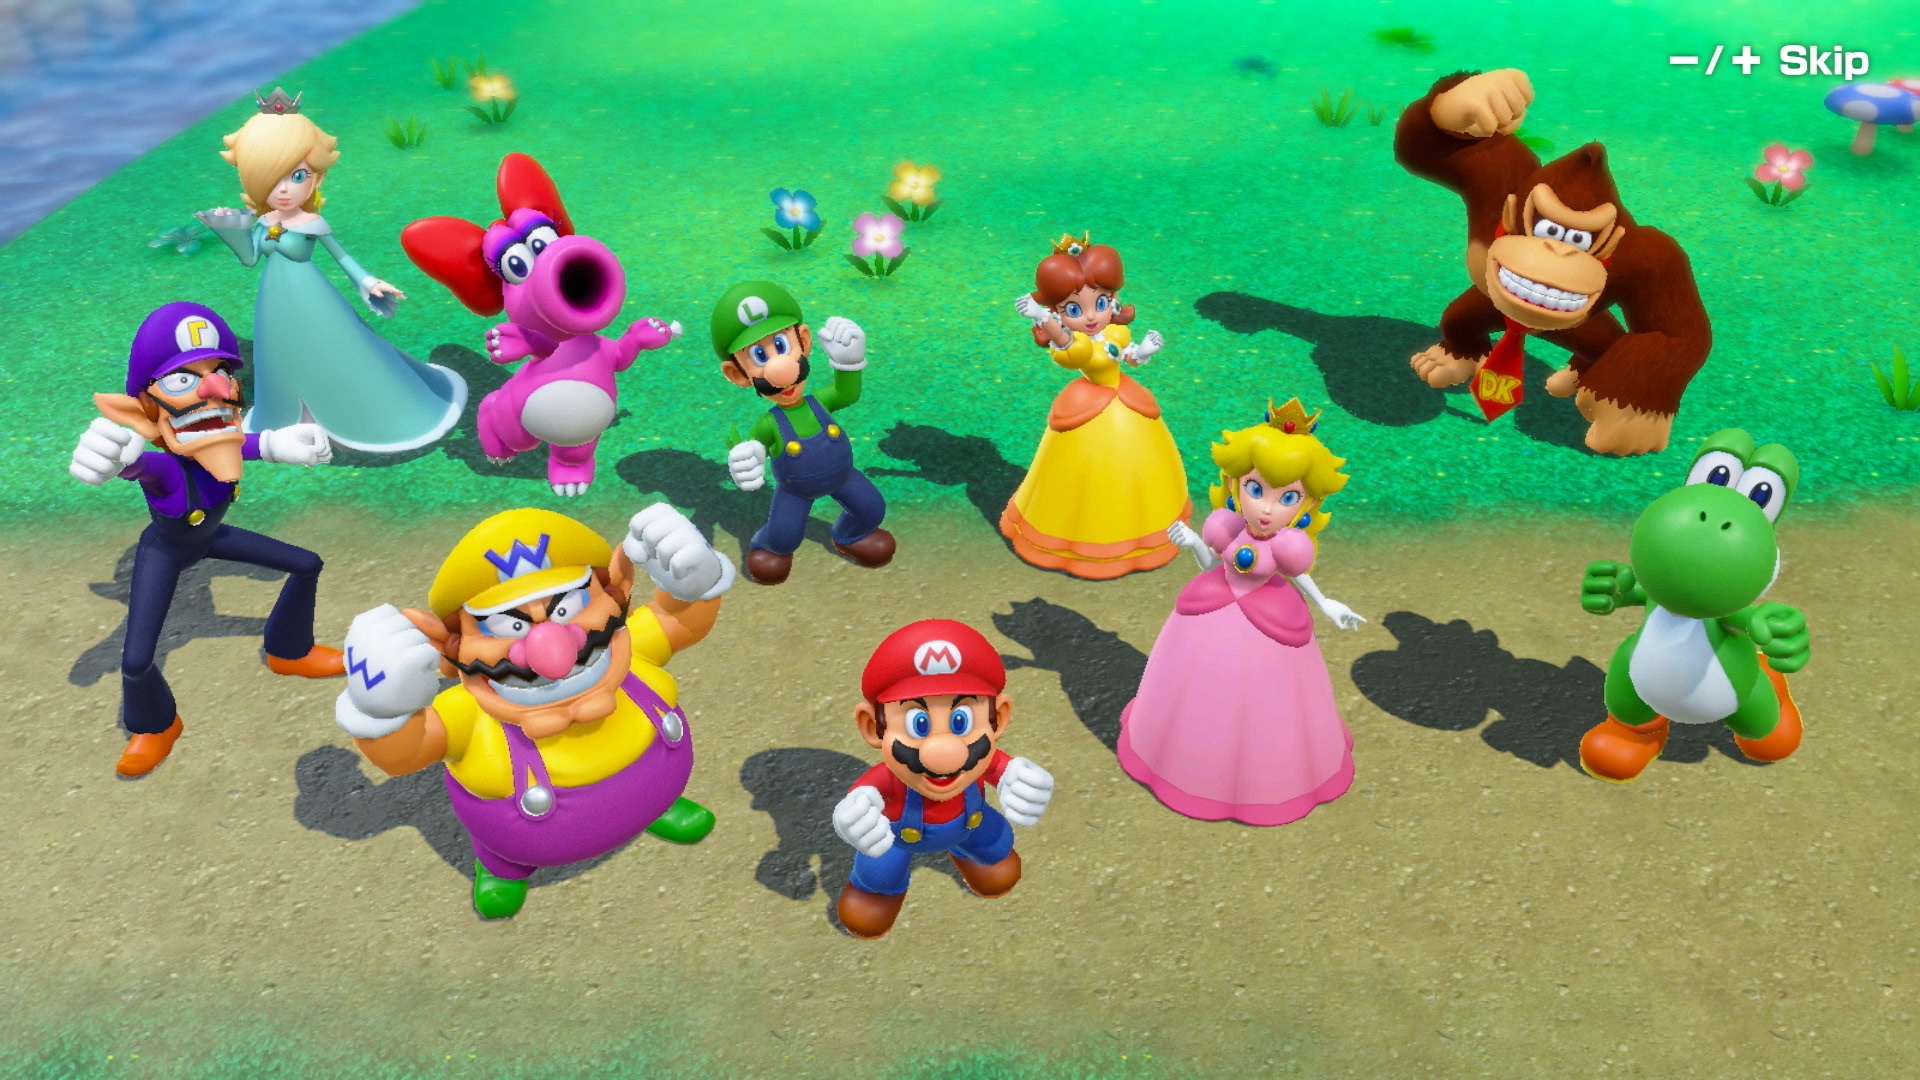 mario-party-superstars-characters-mini-games-boards.jpg